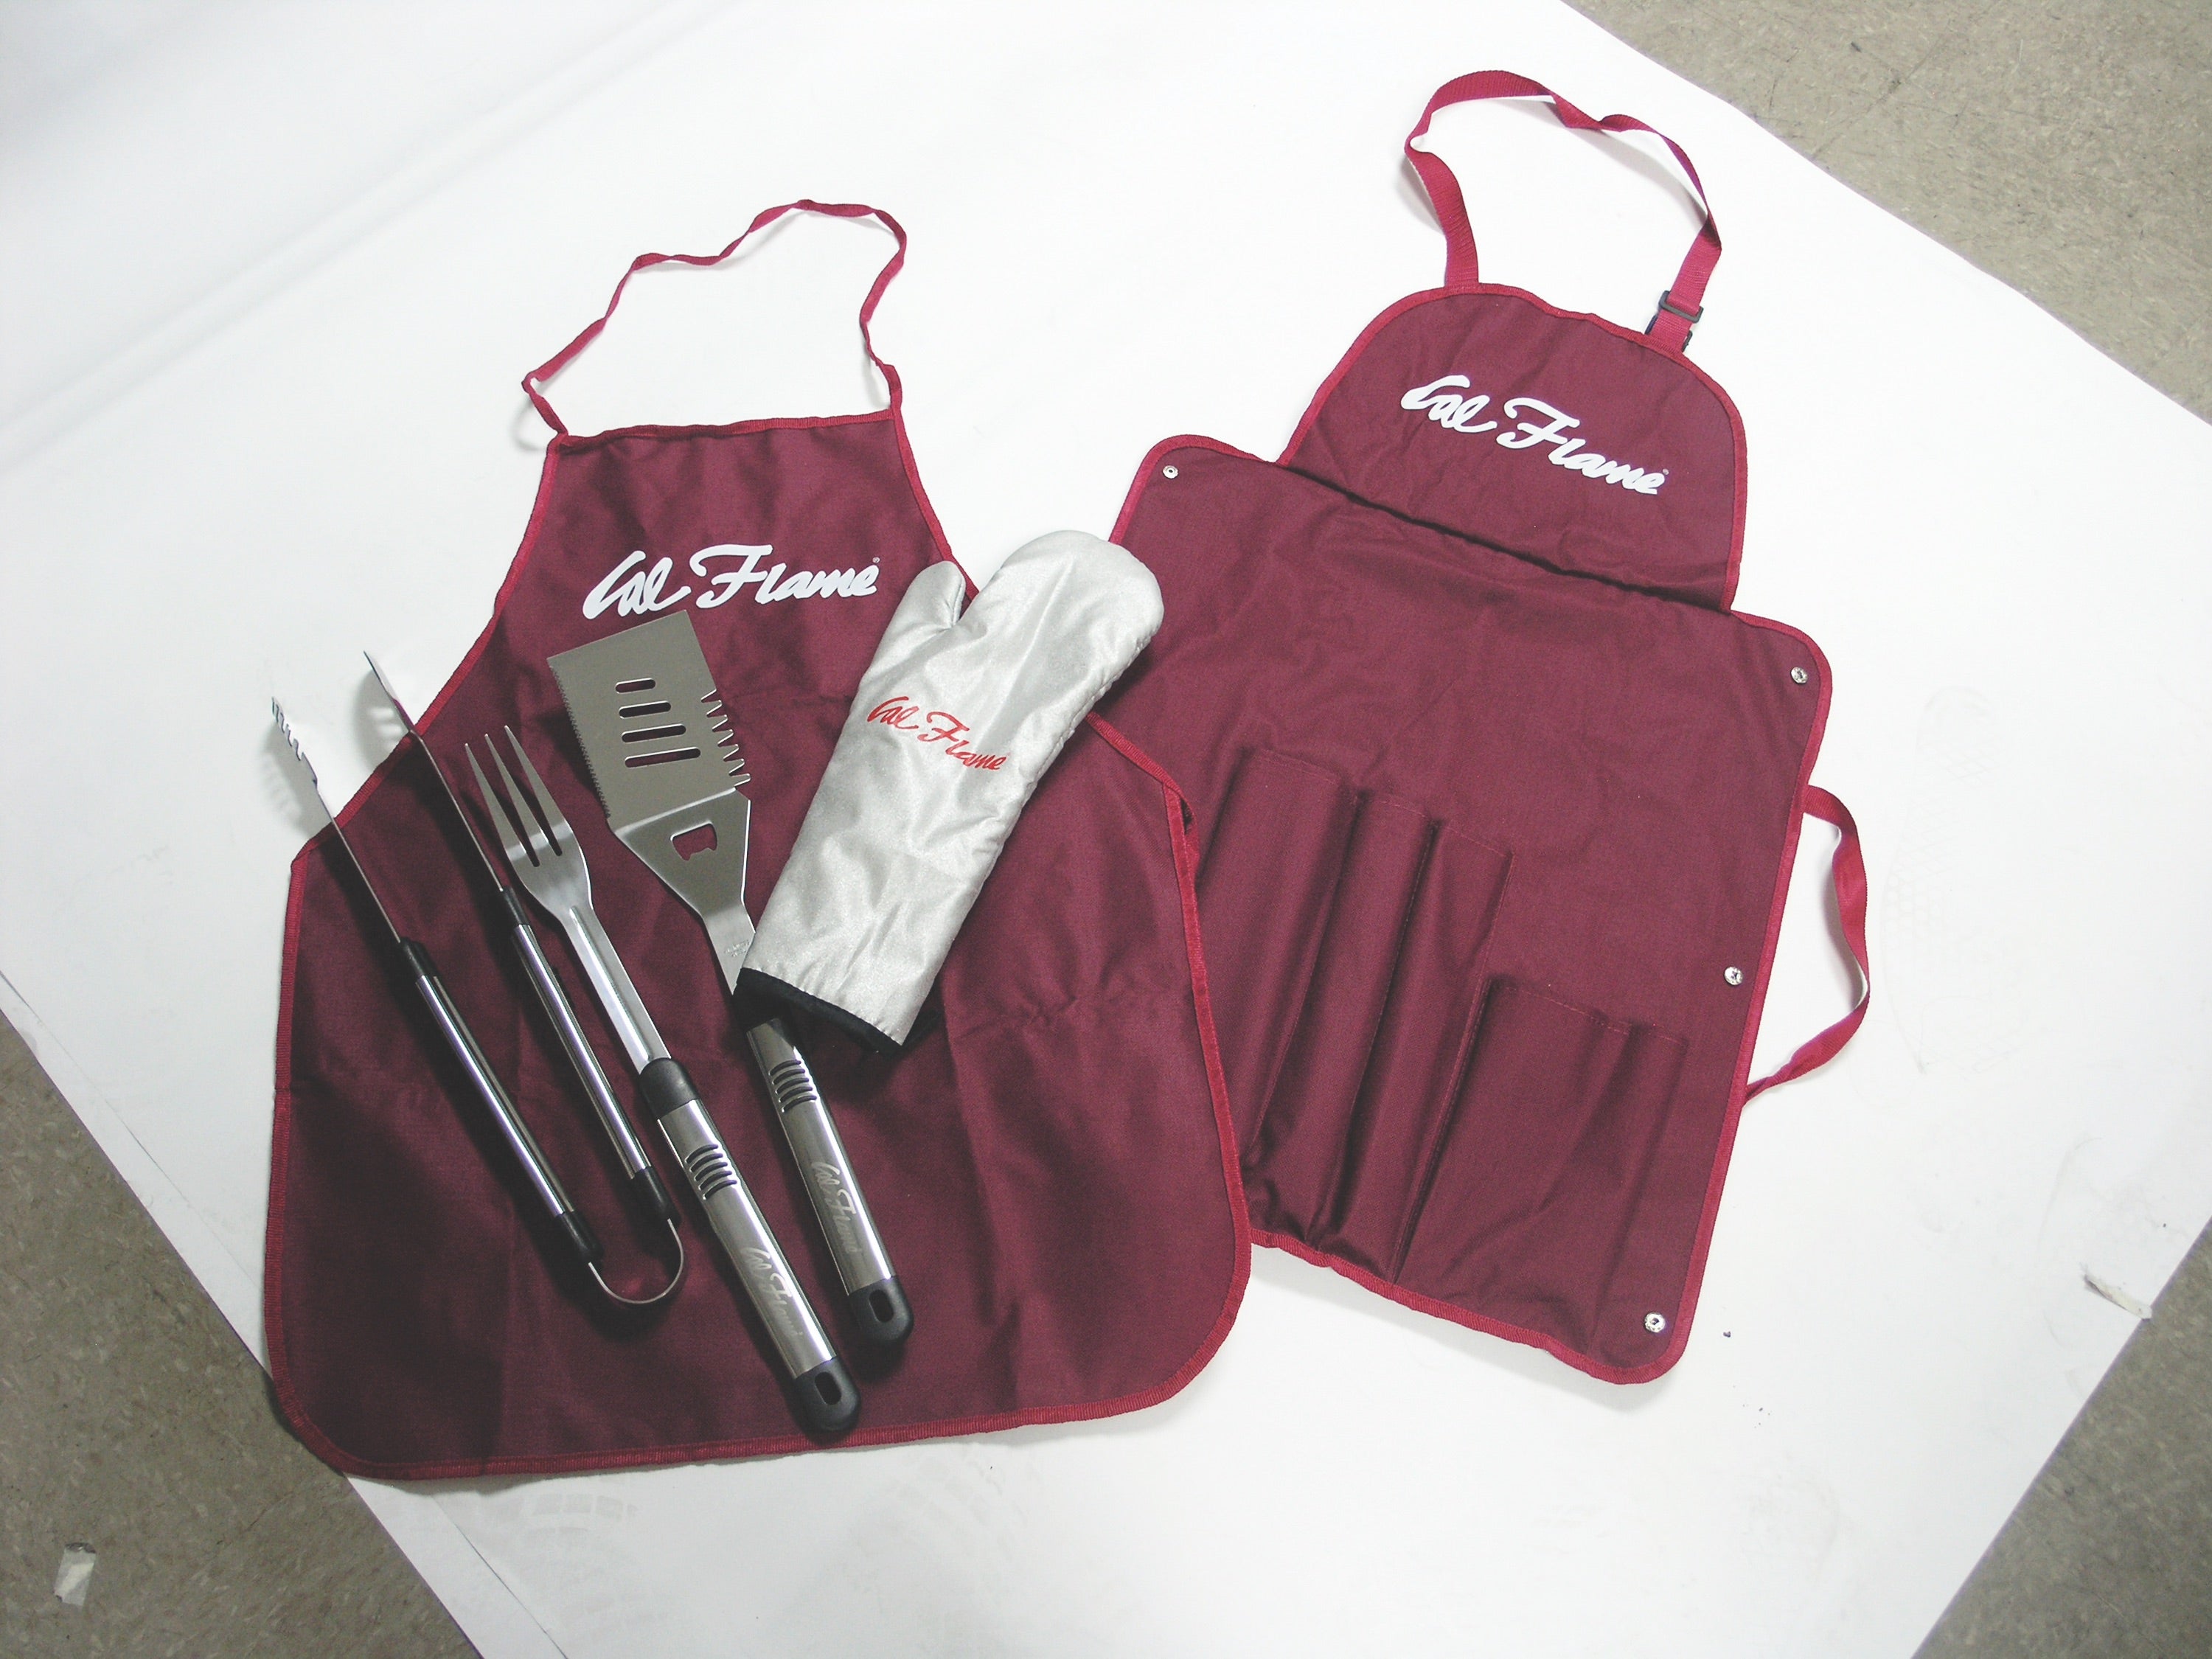 Cal Flame Utensil set with Apron and Glove